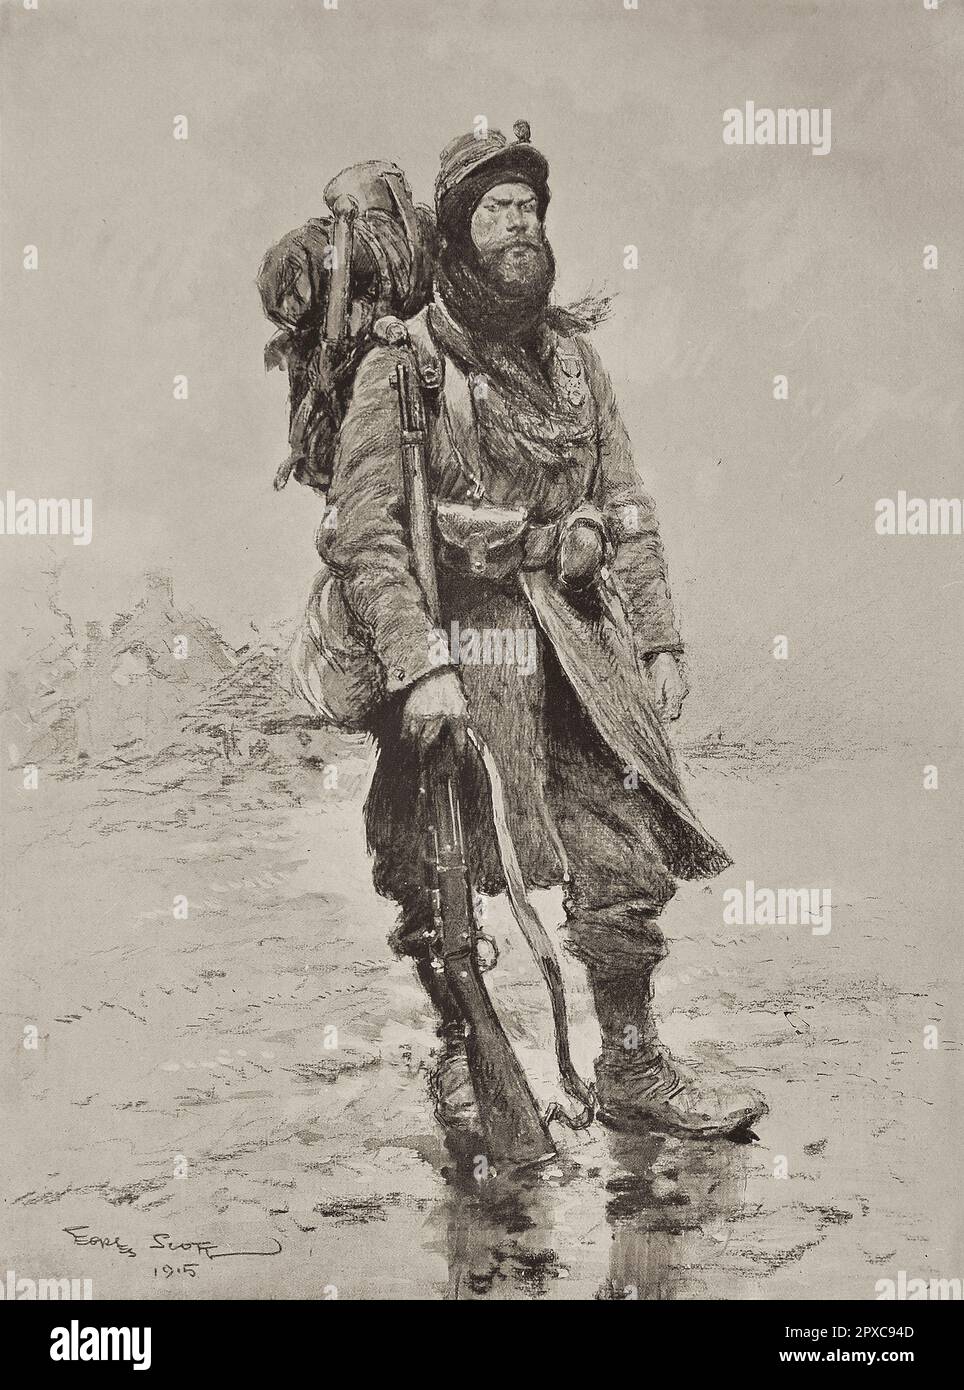 World War I. The soldier of 1915. Poilu. By Georges Scott Poilu is an informal term for a late 18th century–early 20th century French infantryman, meaning, literally, the hairy one. It is still widely used as a term of endearment for the French infantry of World War I. The word carries the sense of the infantryman's typically rustic, agricultural background, and derives from the bushy moustaches and other facial hair affected by many French soldiers after the outbreak of the war as a sign of masculinity. The poilu was particularly known for his love of pinard, his ration of cheap wine. Stock Photo